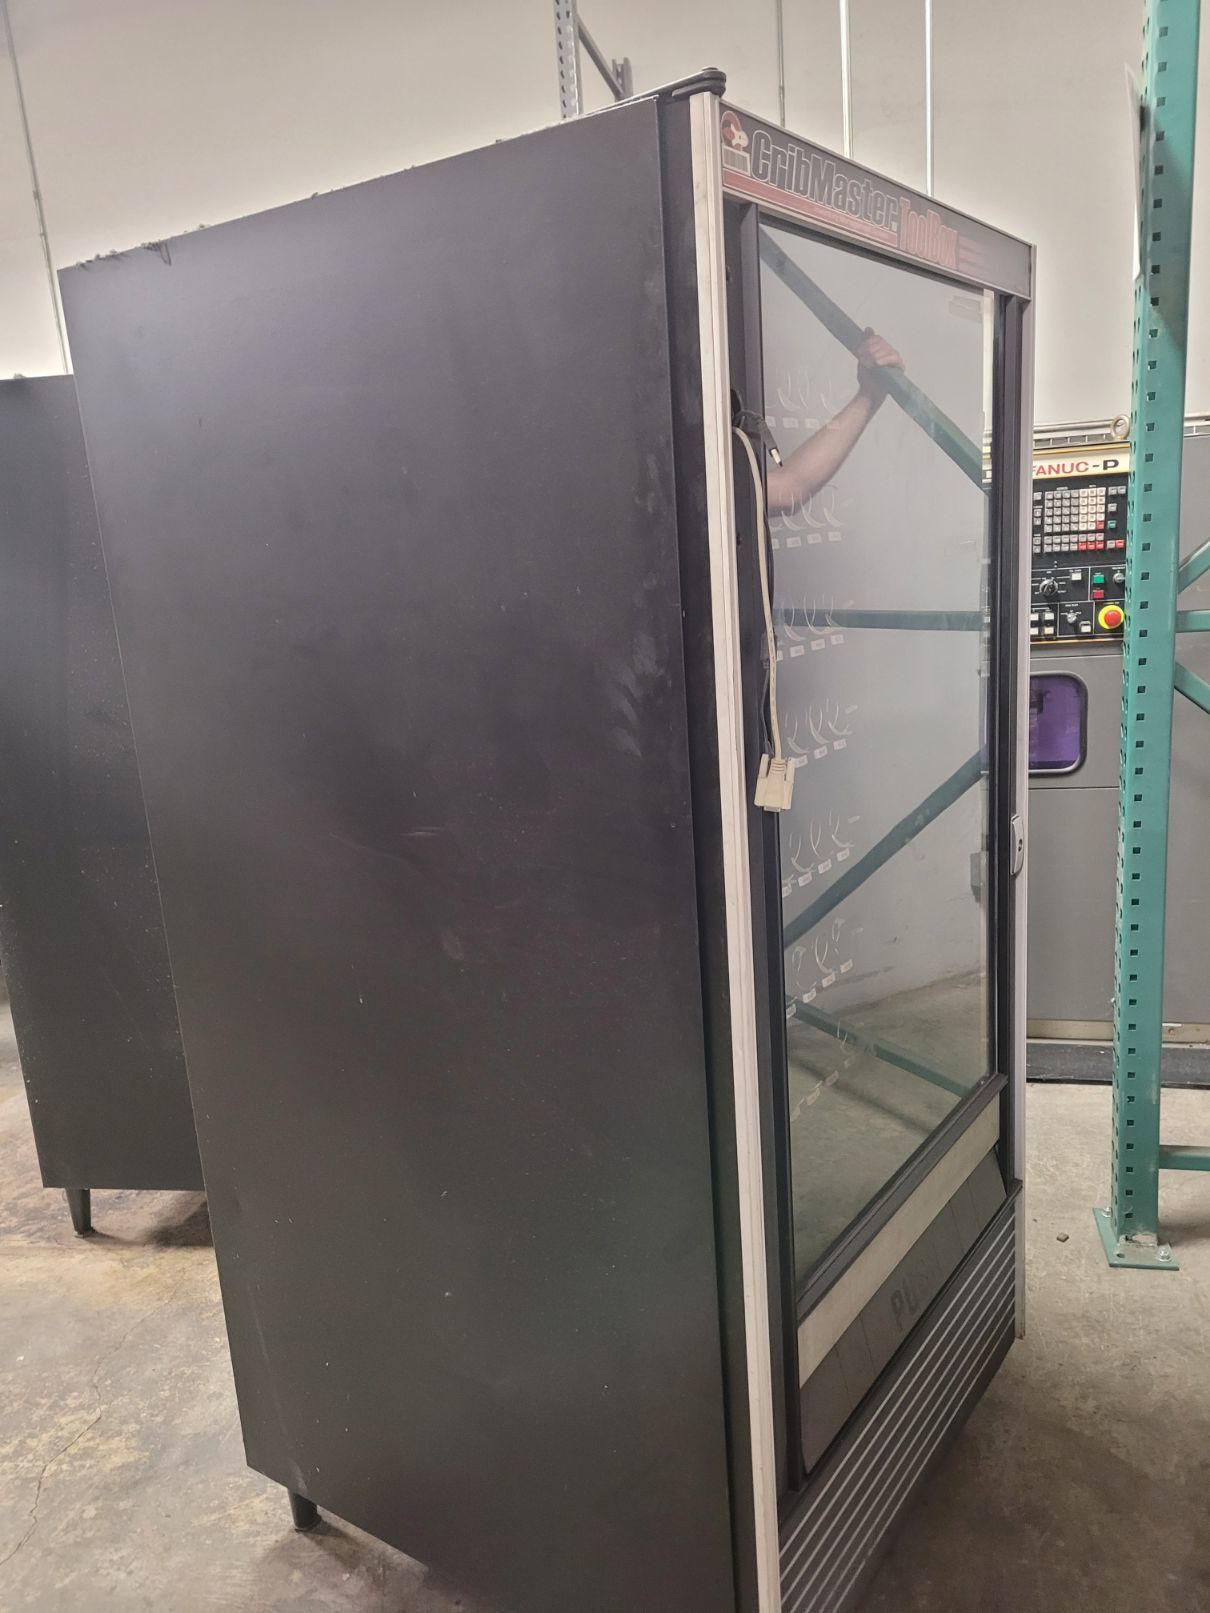 AUTOMATIC PRODUCTS SNACKSHOP 125B Scrapped Equipment | MD Equipment Services LLC